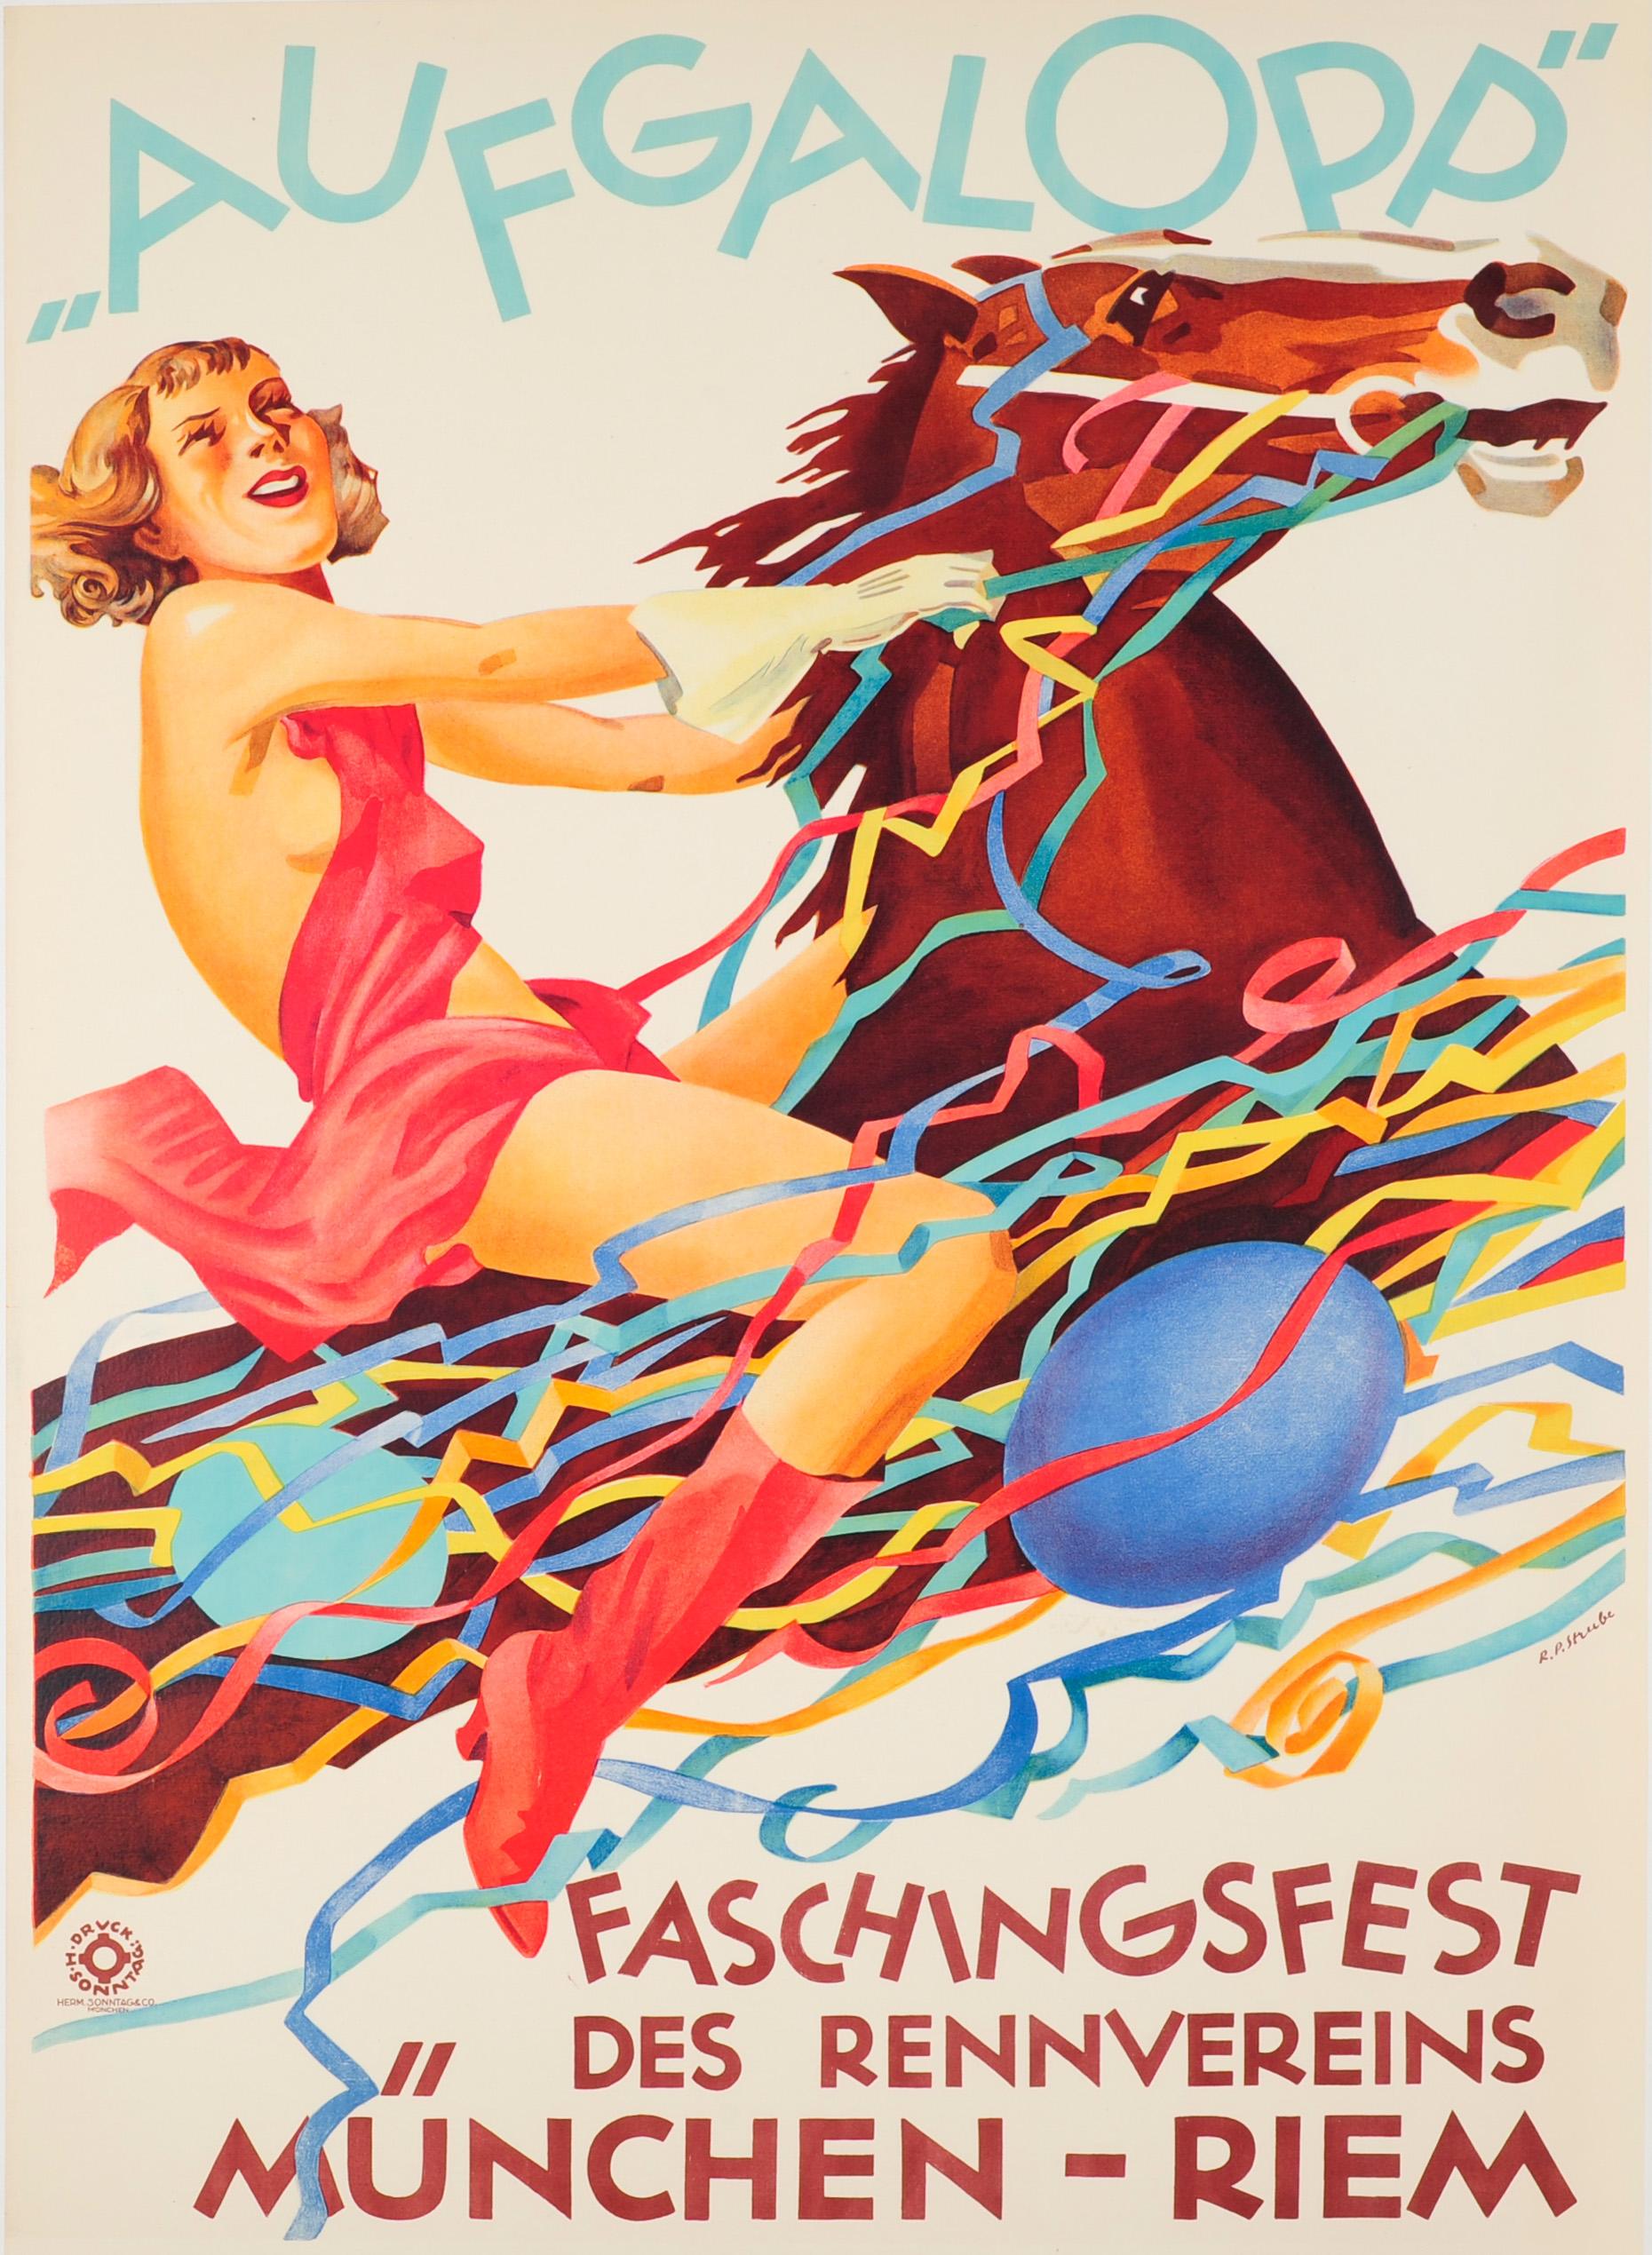 Unknown Print - Original Vintage Poster For The Aufgalopp Faschingsfest Carnival Munich Ft Horse